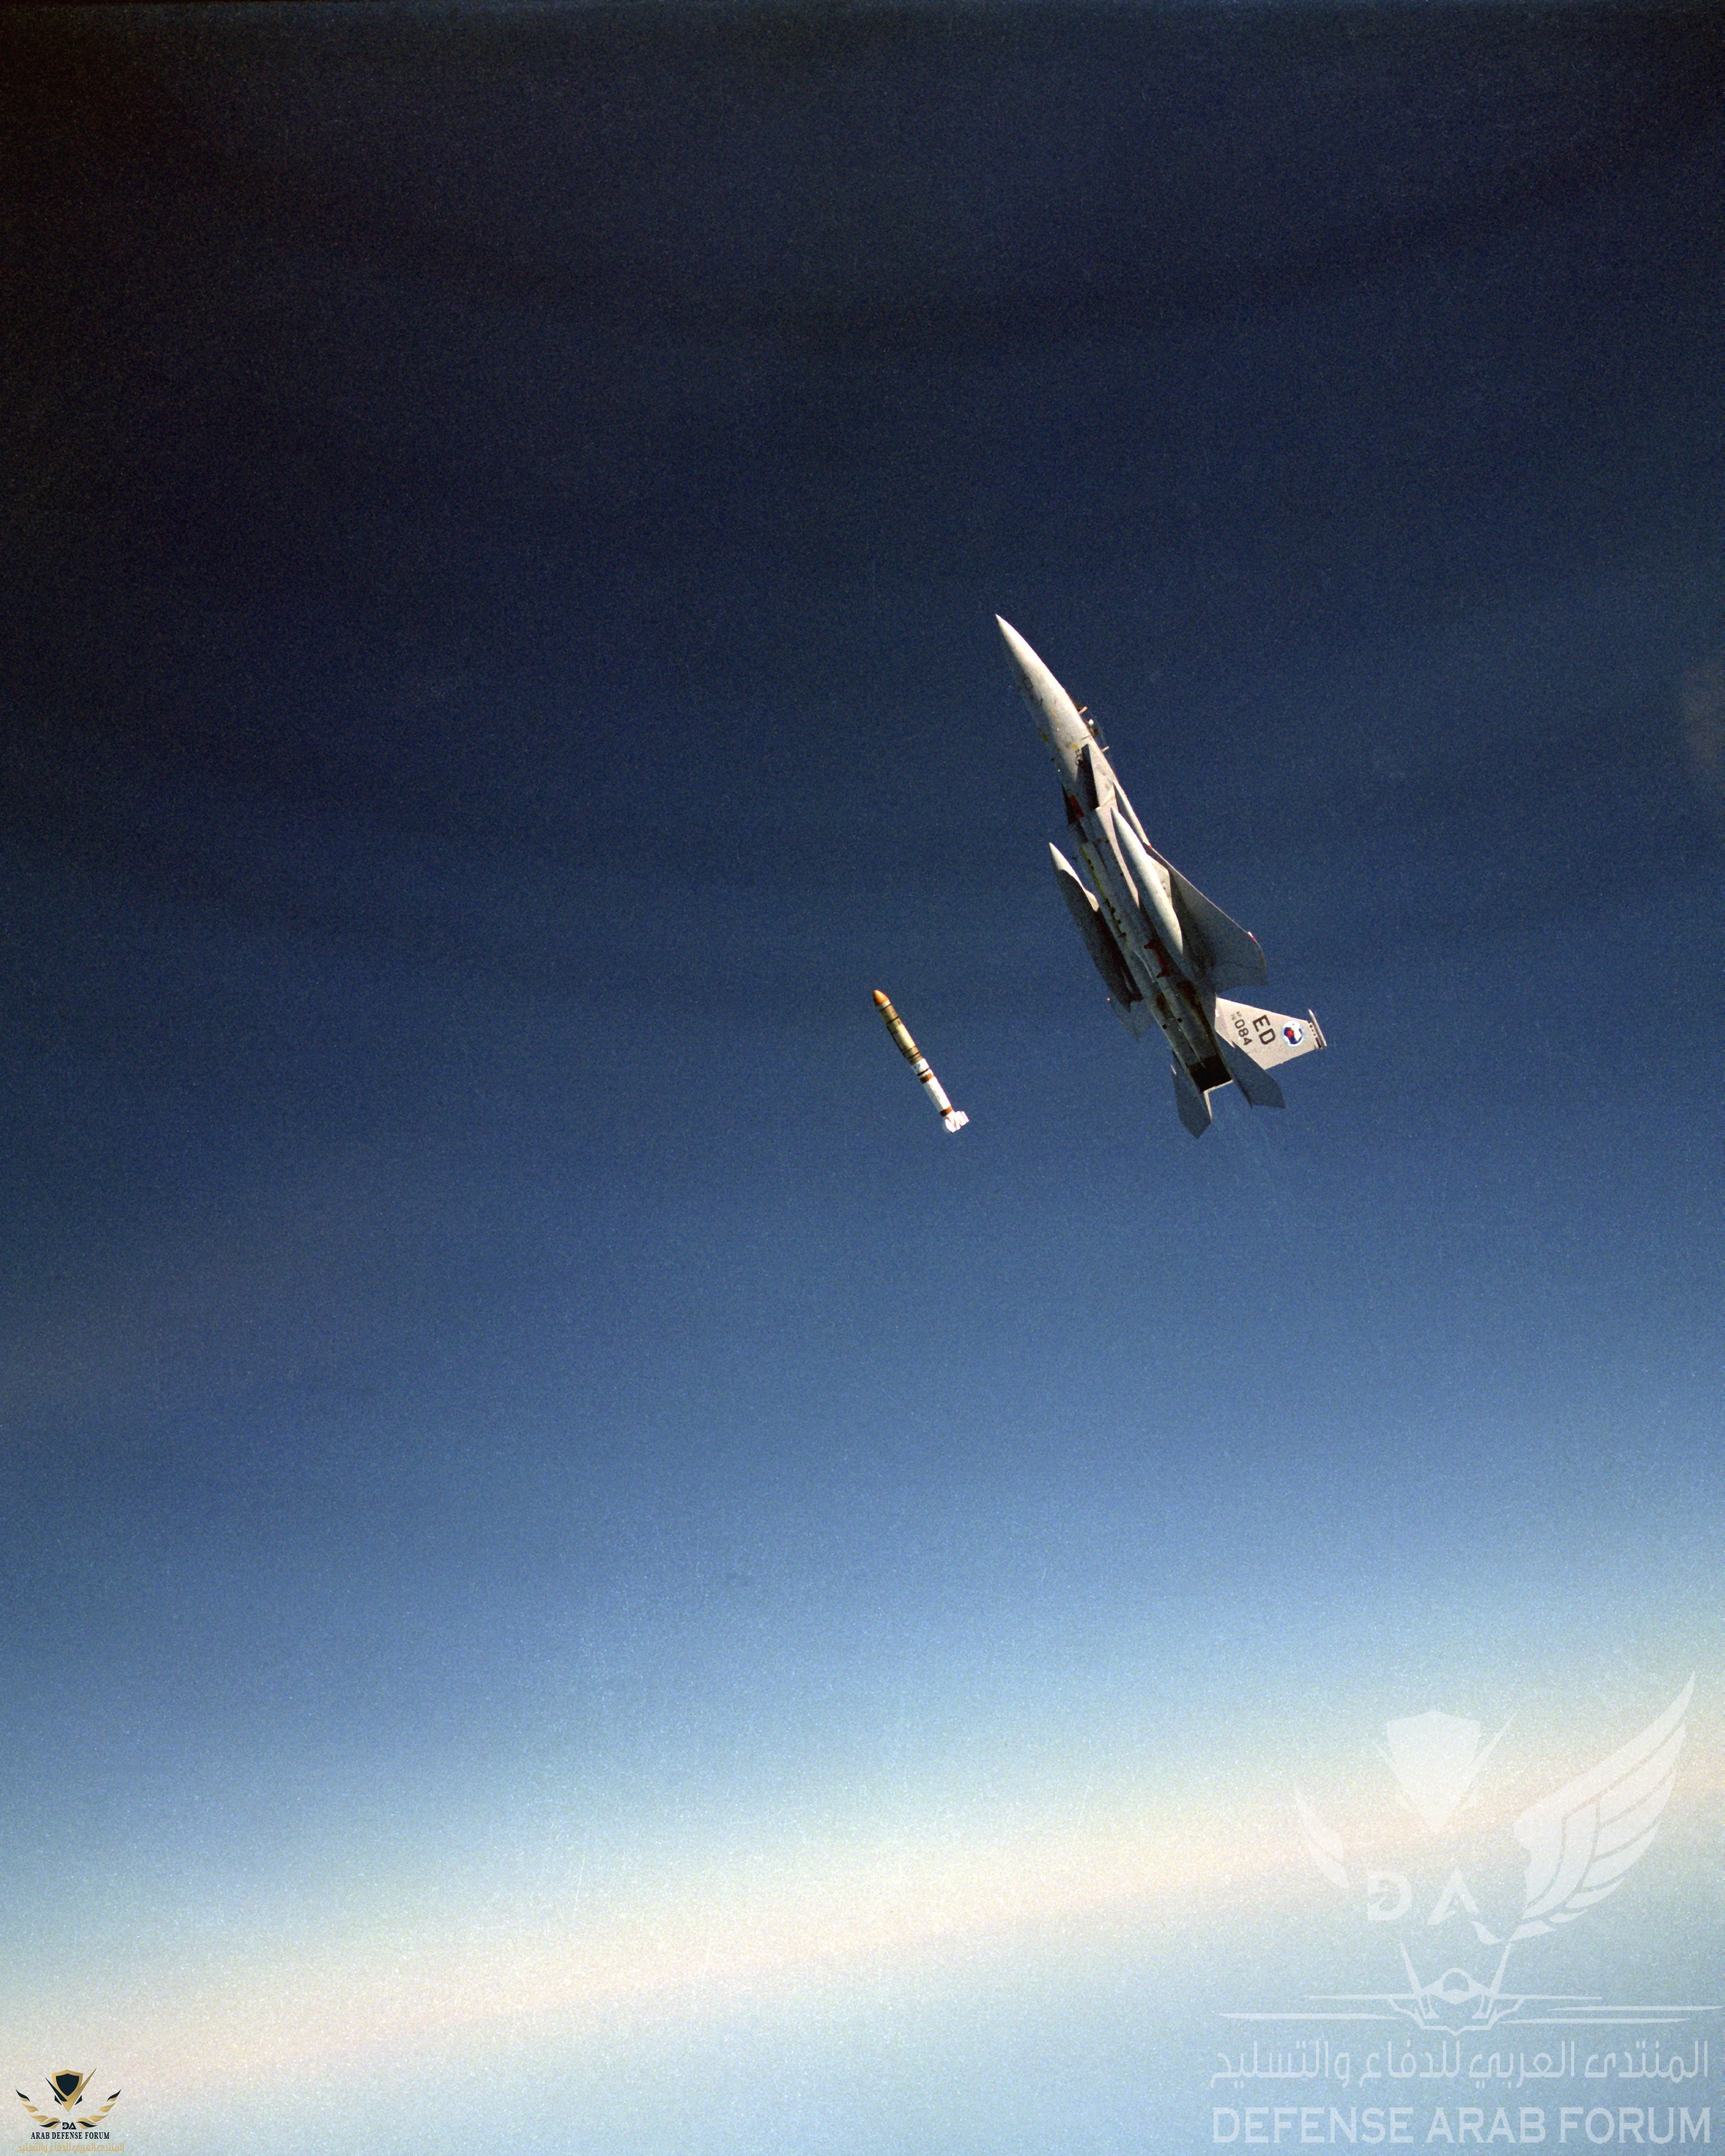 An_air-to-air_left_side_view_of_an_F-15_Eagle_aircraft_releasing_an_anti-satellite_(ASAT)_mis...jpeg